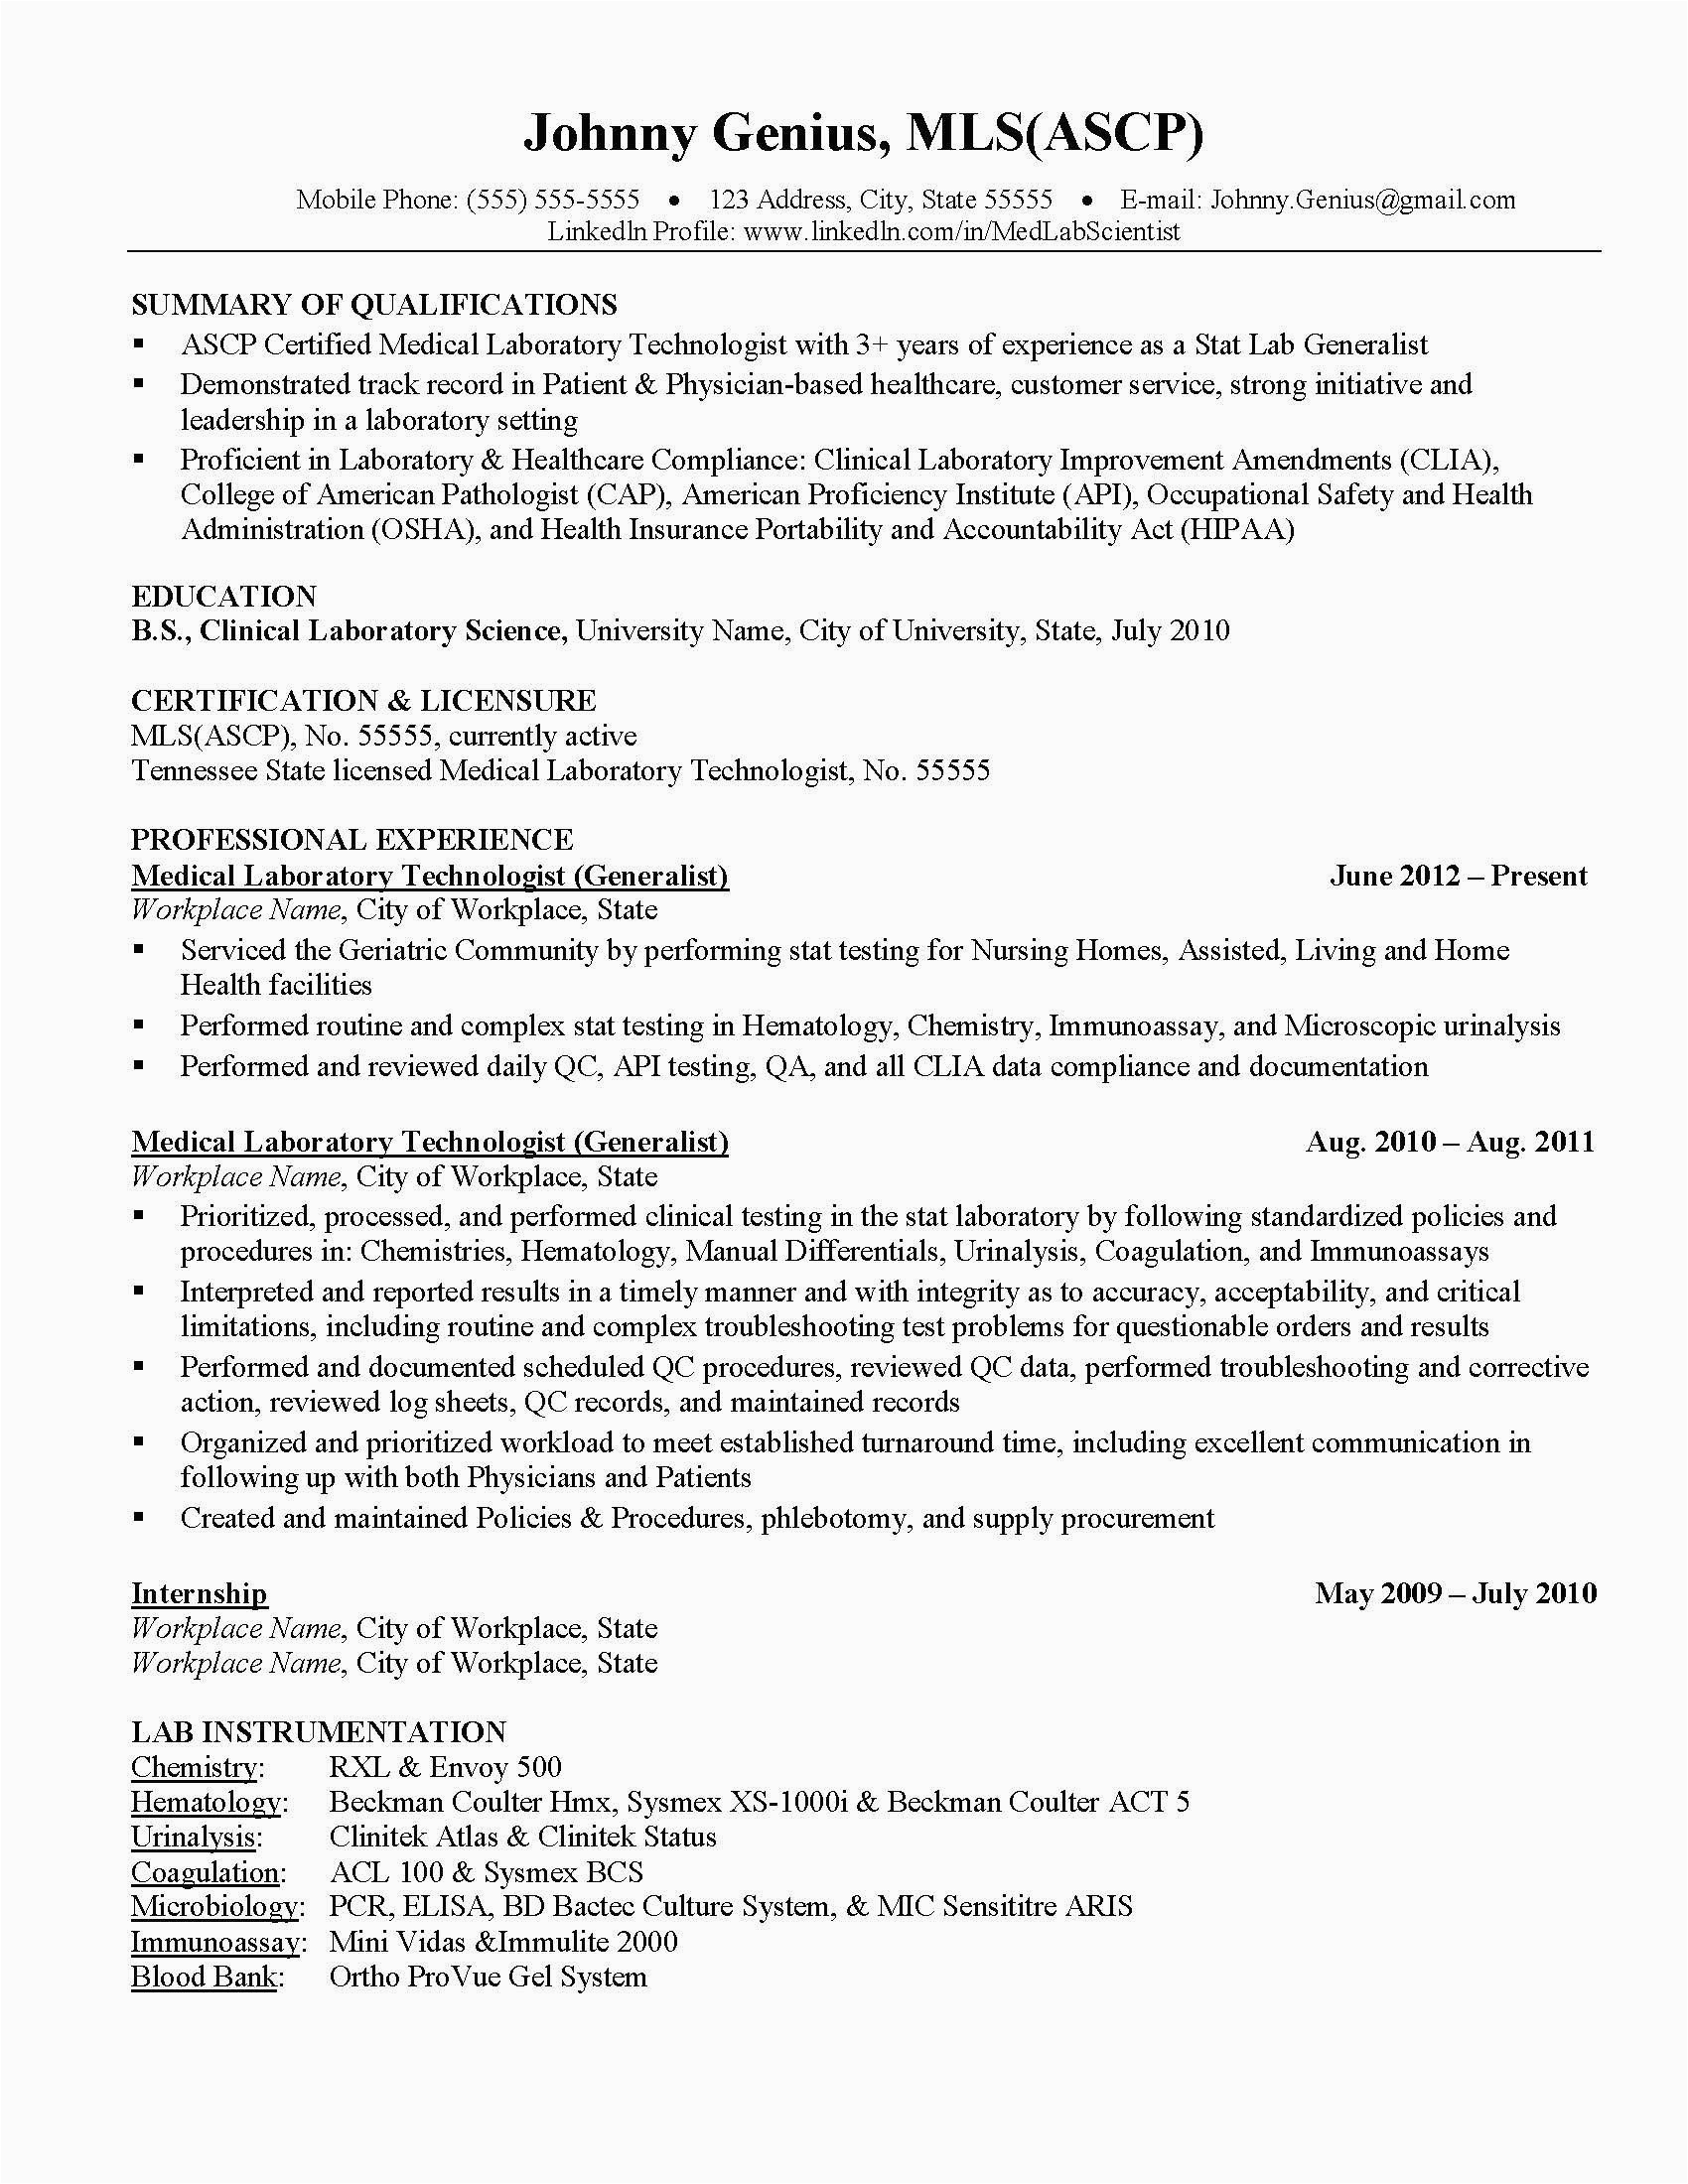 Jobheromedical Office Administrative assistant Resume Samples Jobhero Administrative assistant Resume Sample Jobhero Bank Of Resume